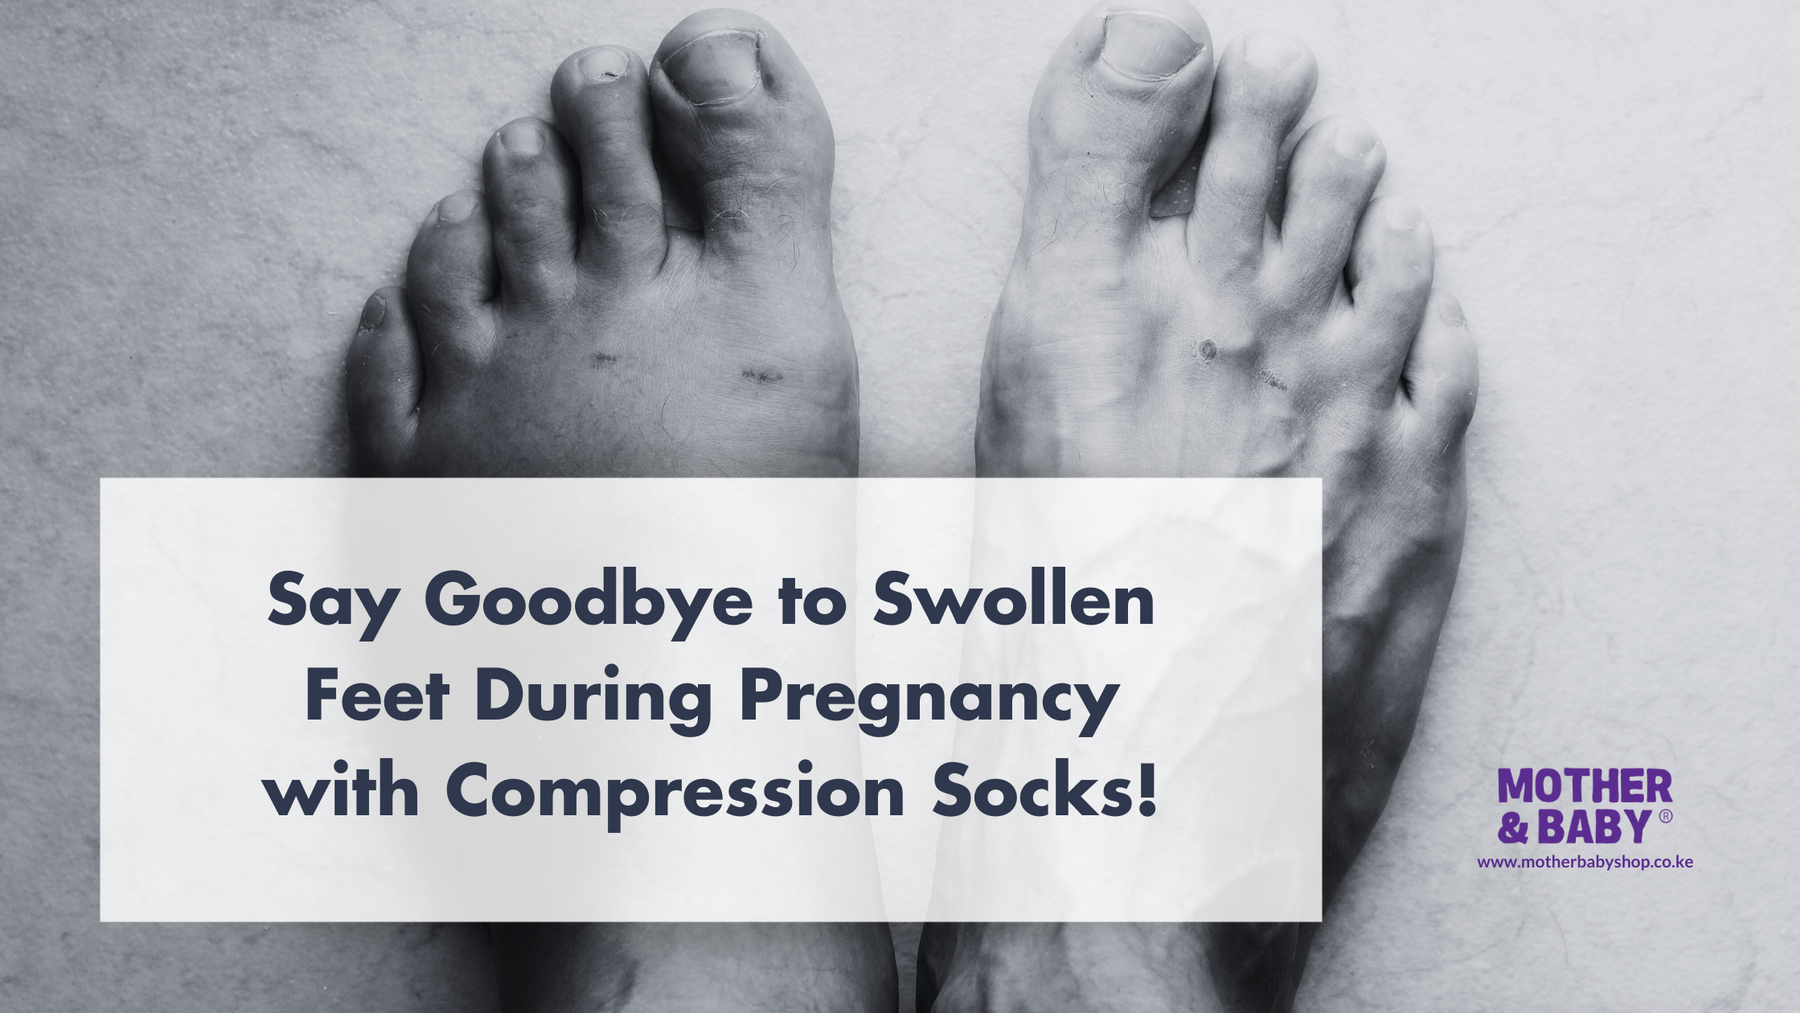 Say Goodbye to Swollen Feet During Pregnancy with Compression Socks!